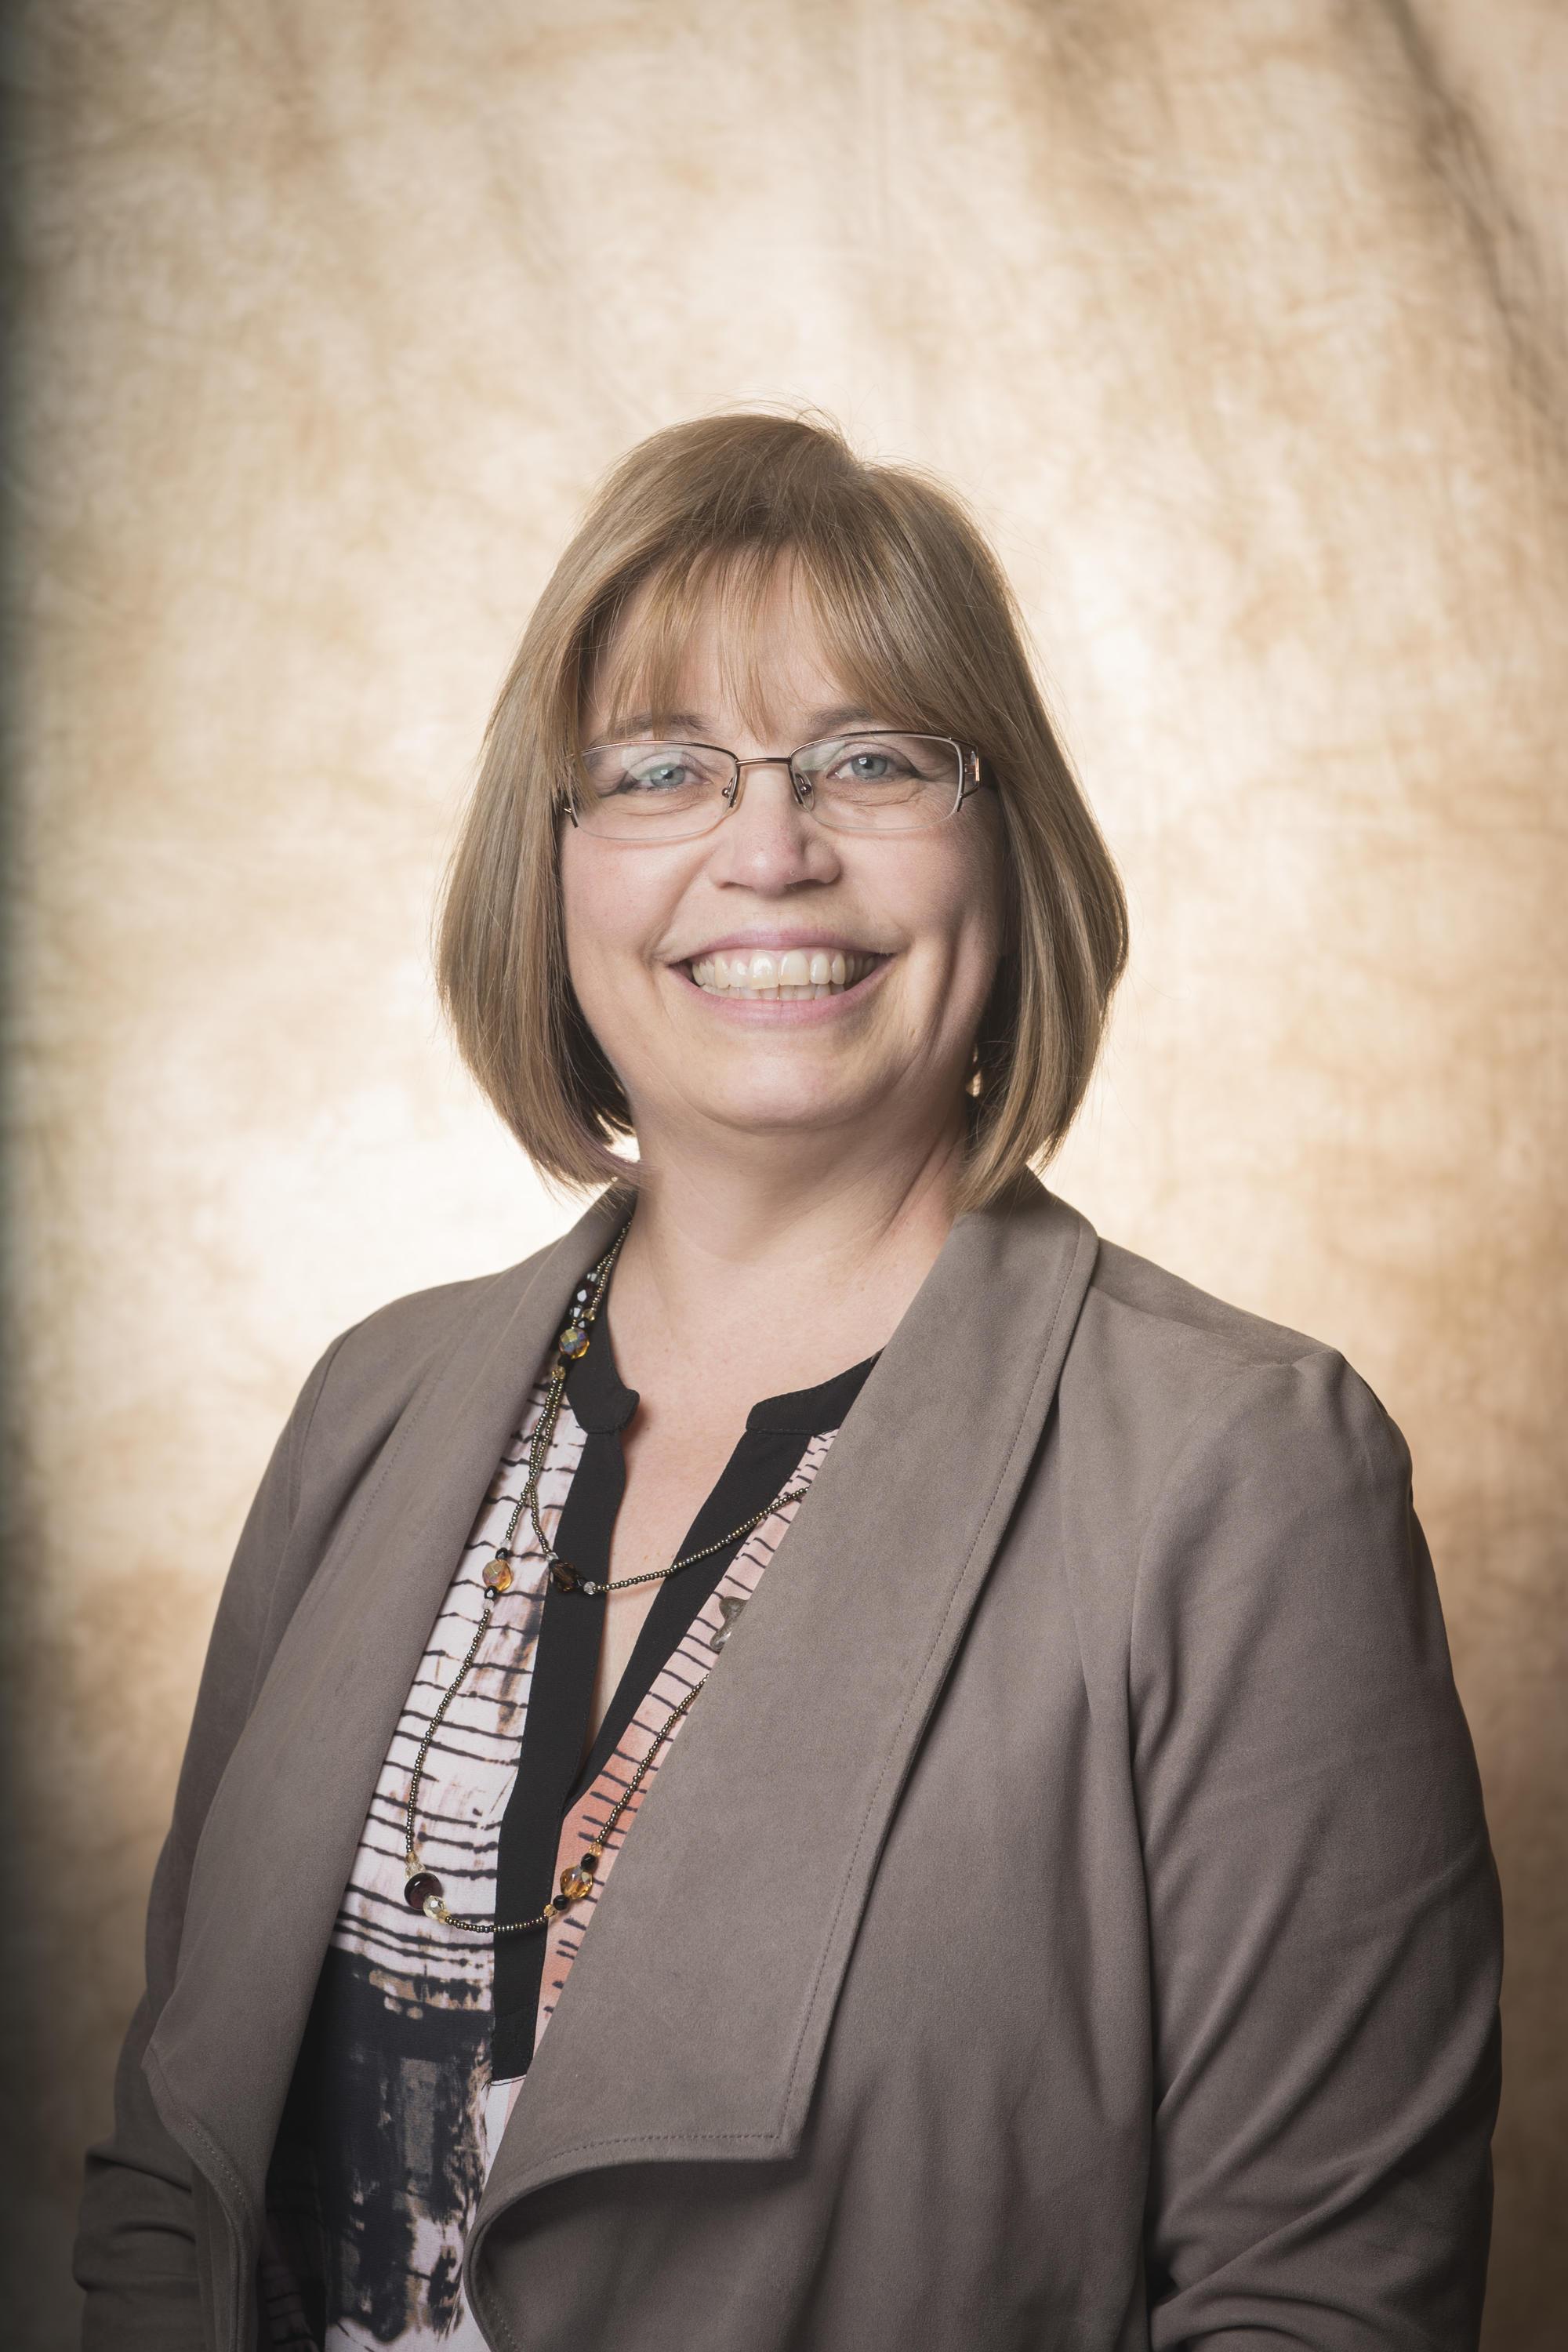 Lynette Black is an Extension associate professor and Oregon 4-H Youth Development faculty.